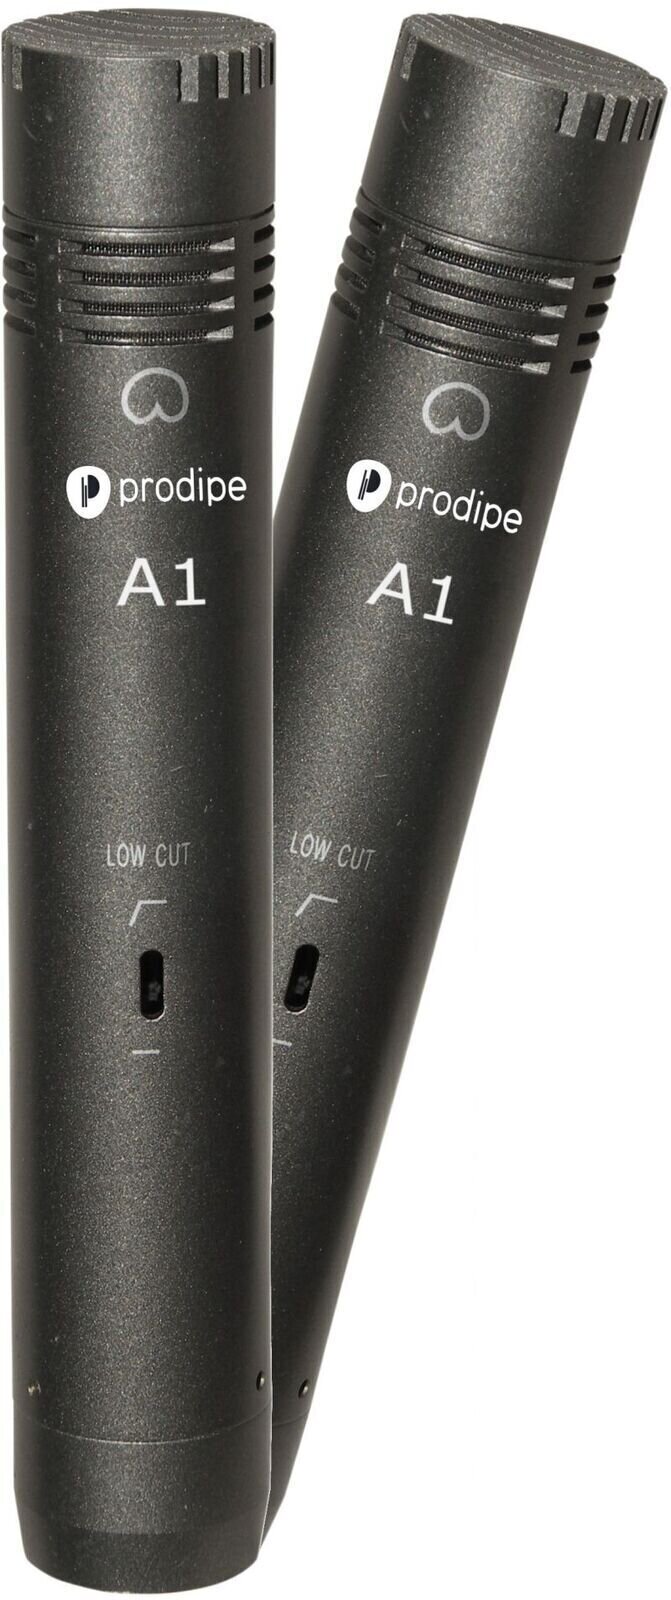 STEREO Microphone Prodipe A1 DUO